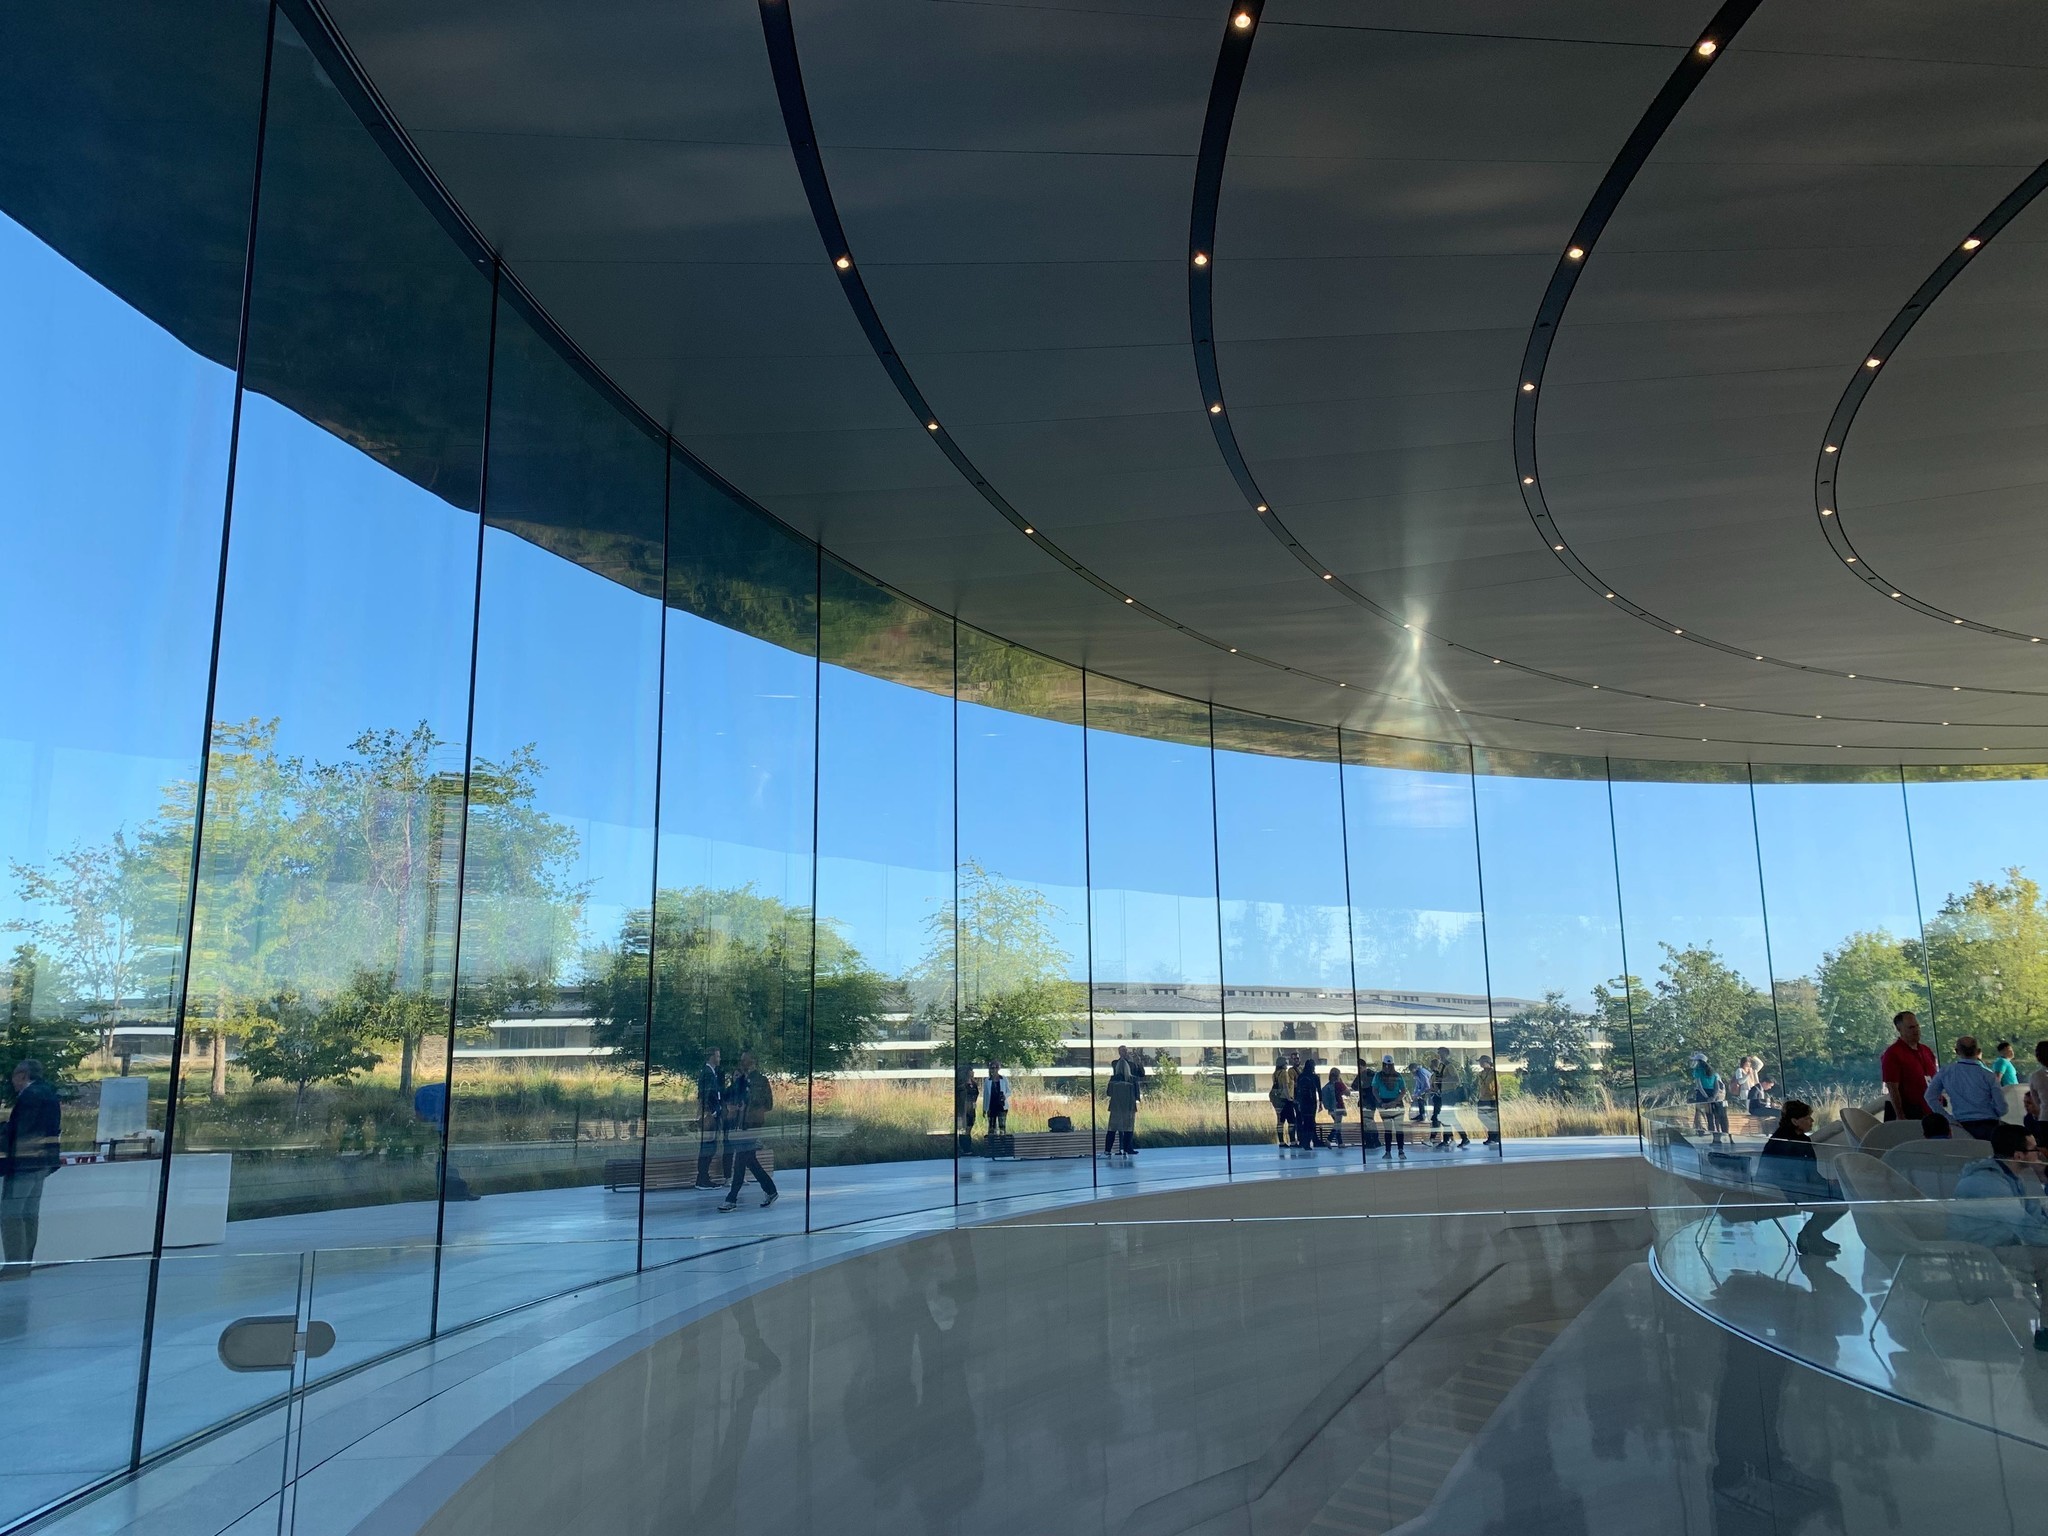 All of the major announcements from Apple's 2019 iPhone Event